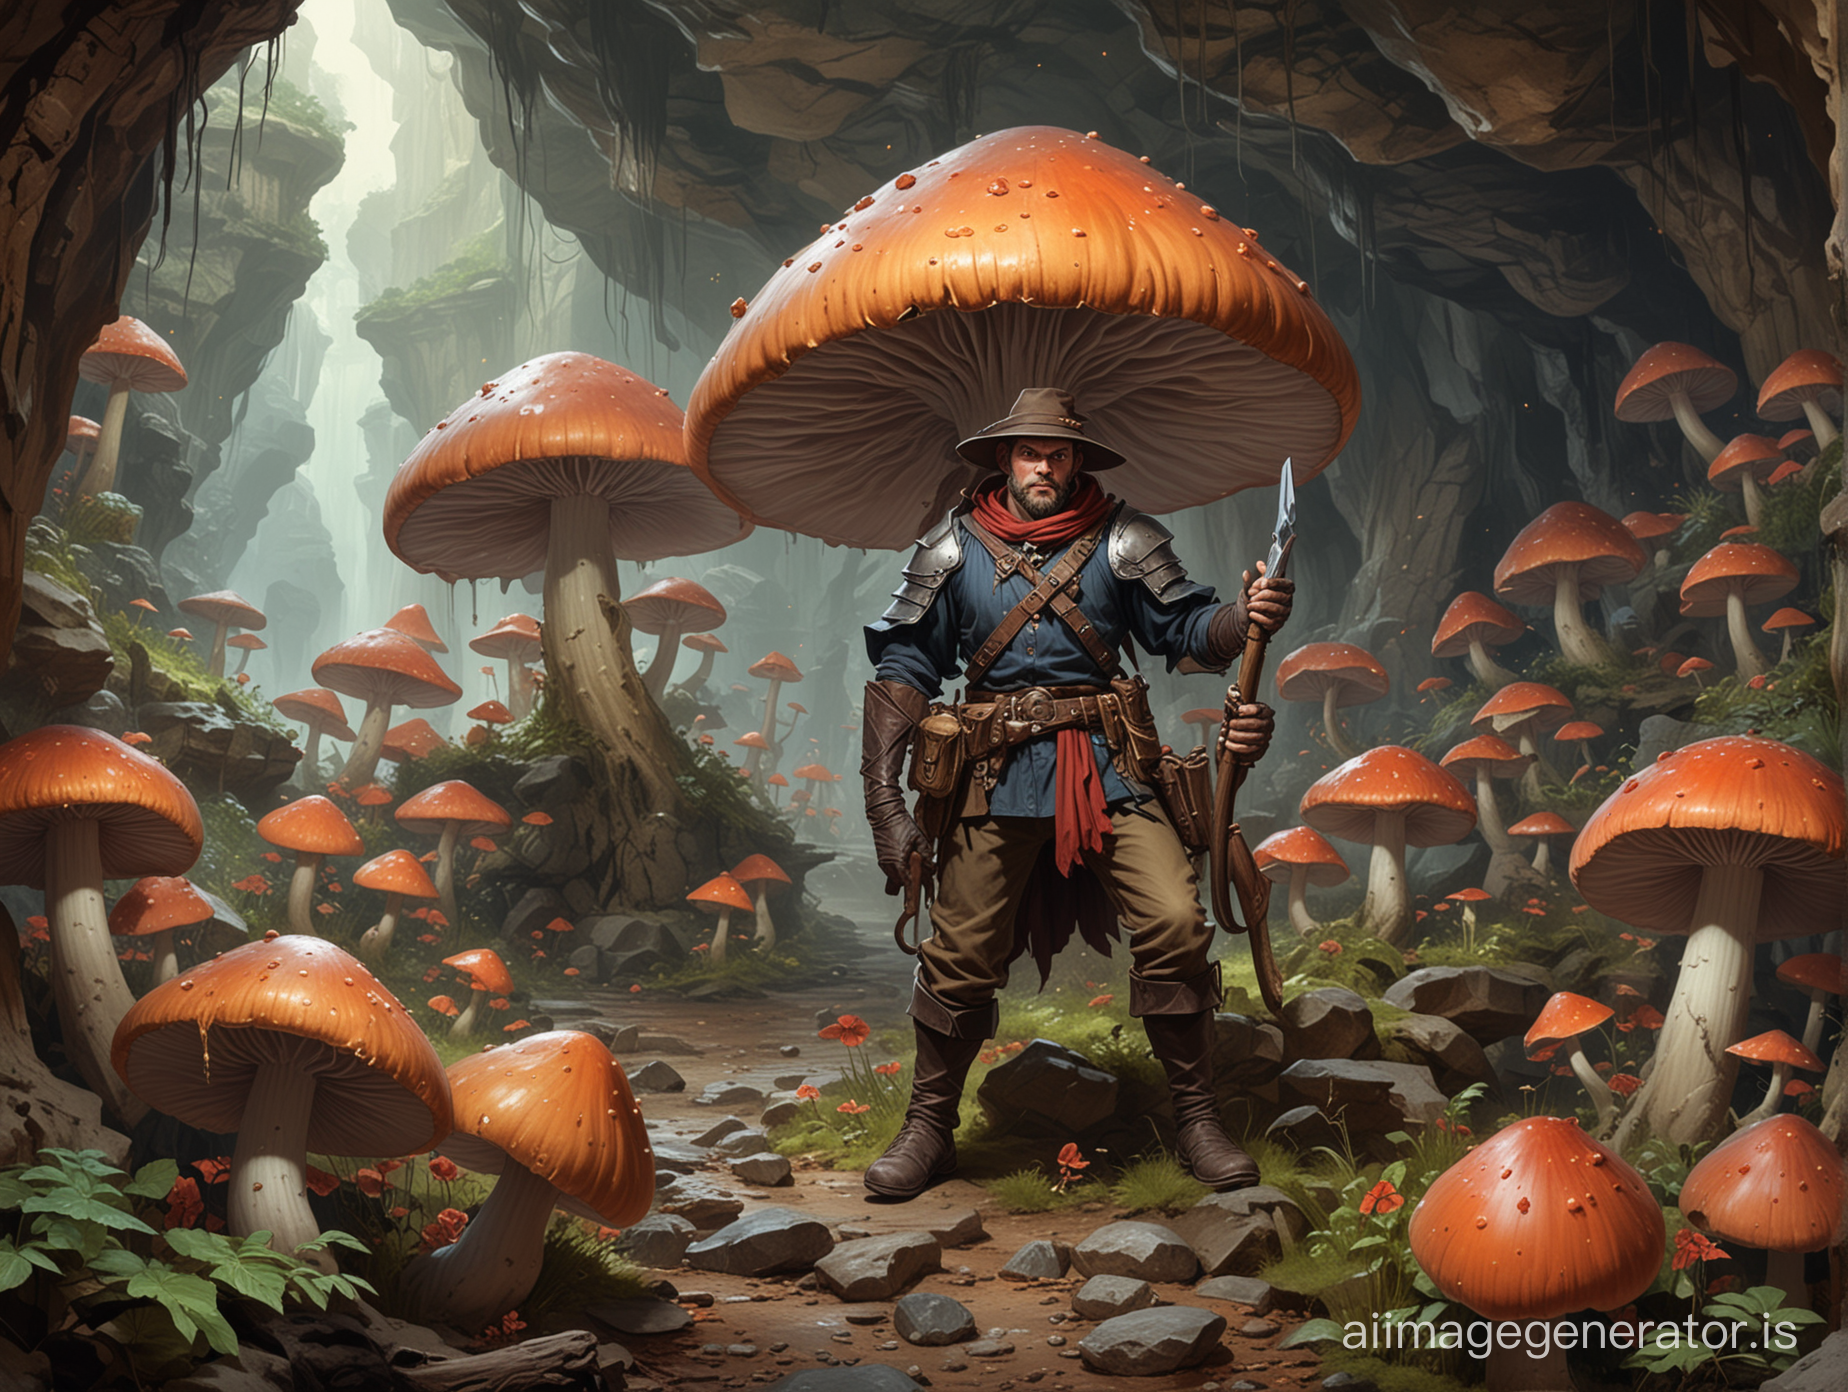 DnD roper in a cave of giant mushrooms